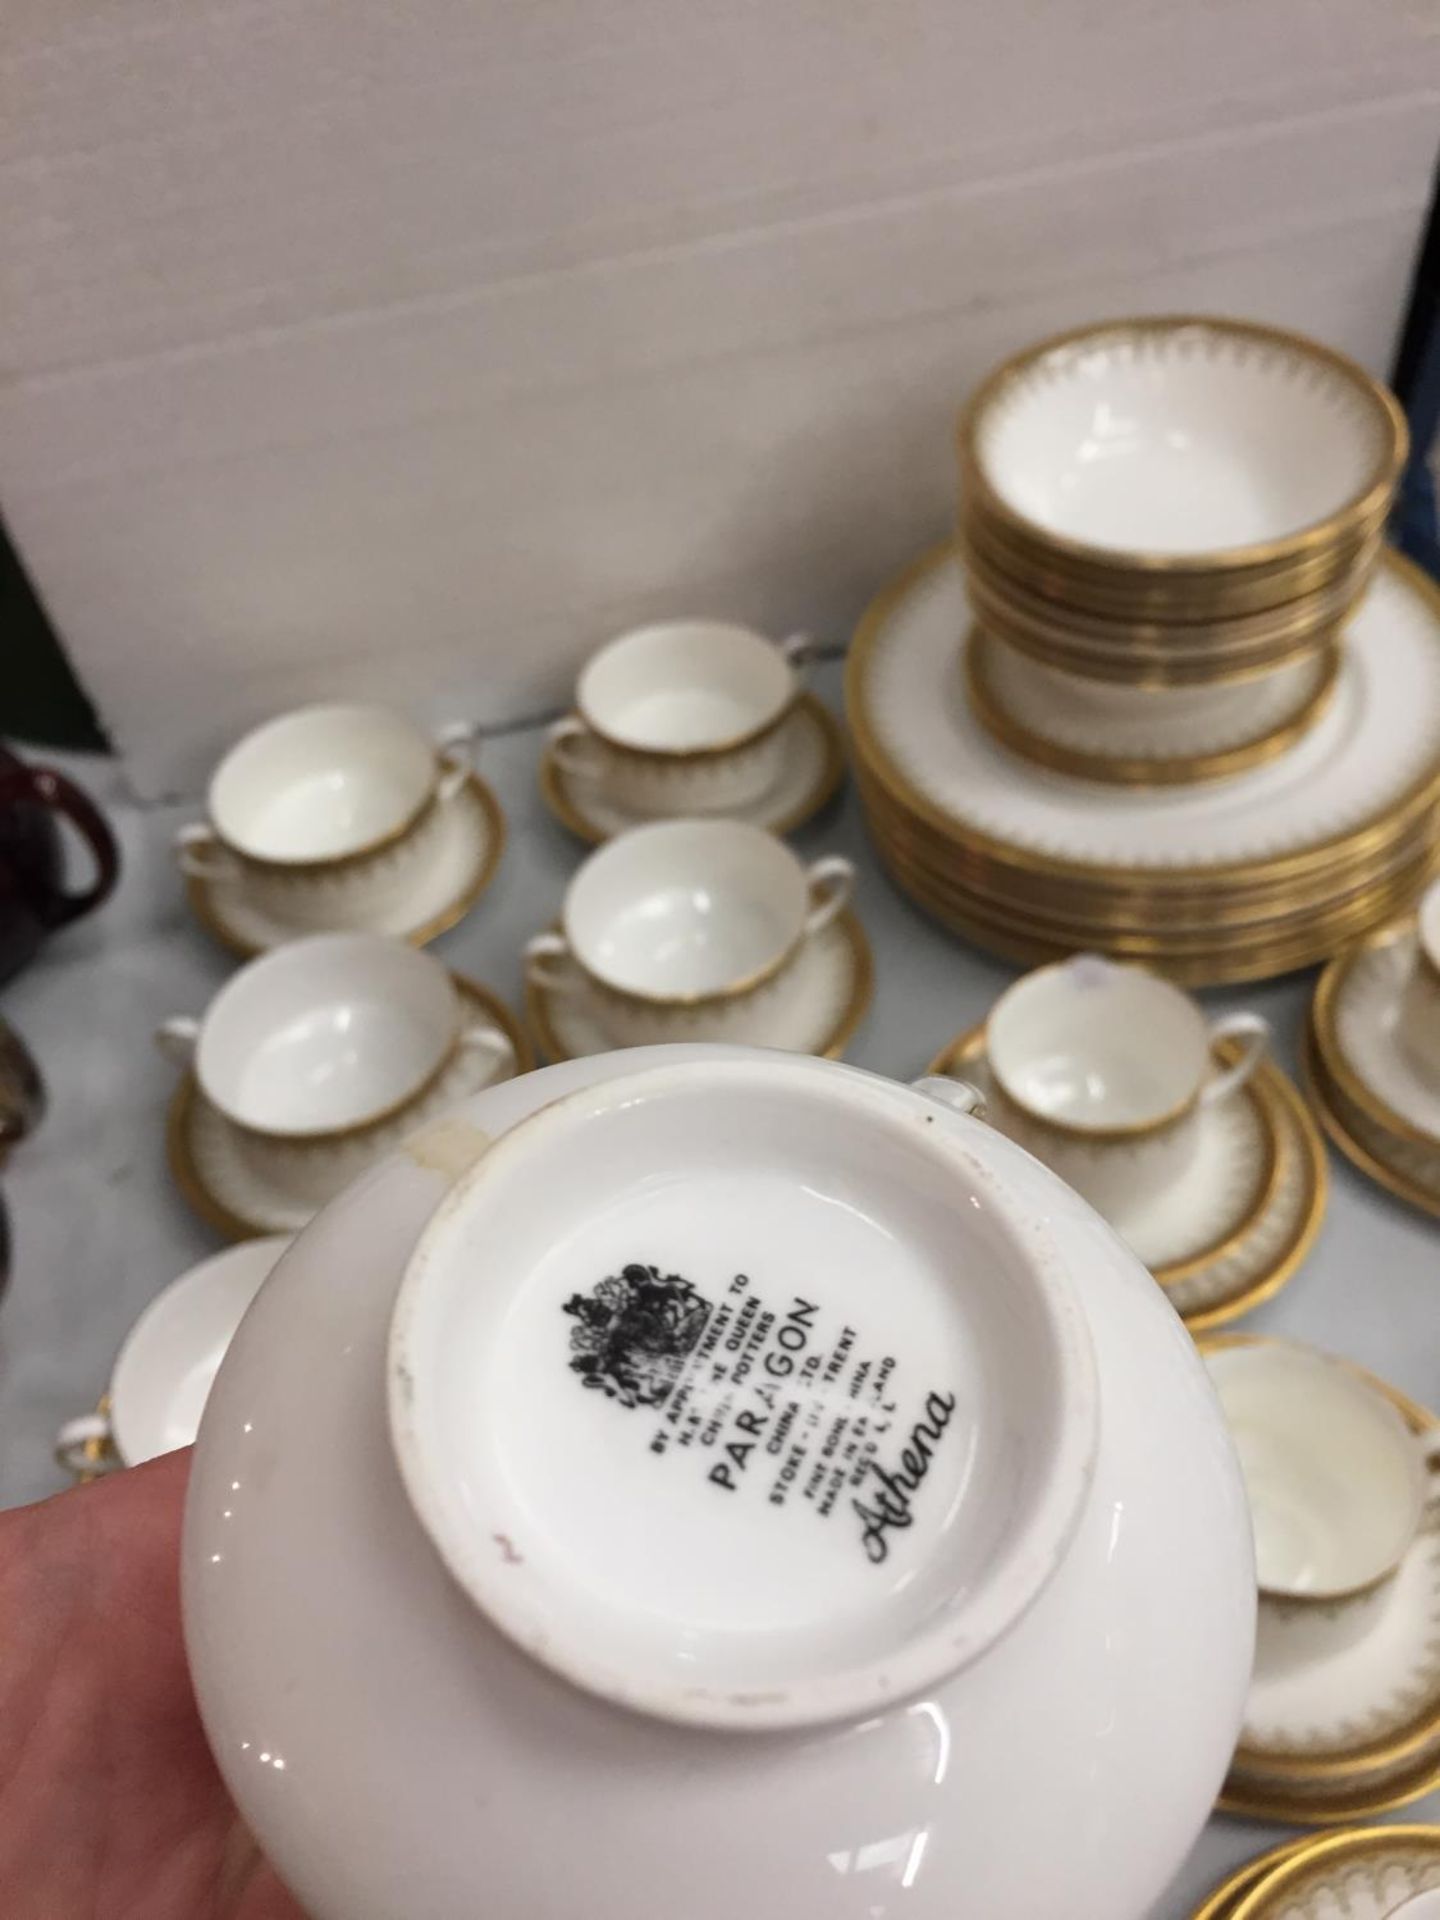 A COLLECTION OF ROYAL ALBERT " ATHENA DESIGN"BONE CHINA DINNER SERVICE TO INCLUDE SIX TEA CUPS AND - Image 4 of 5